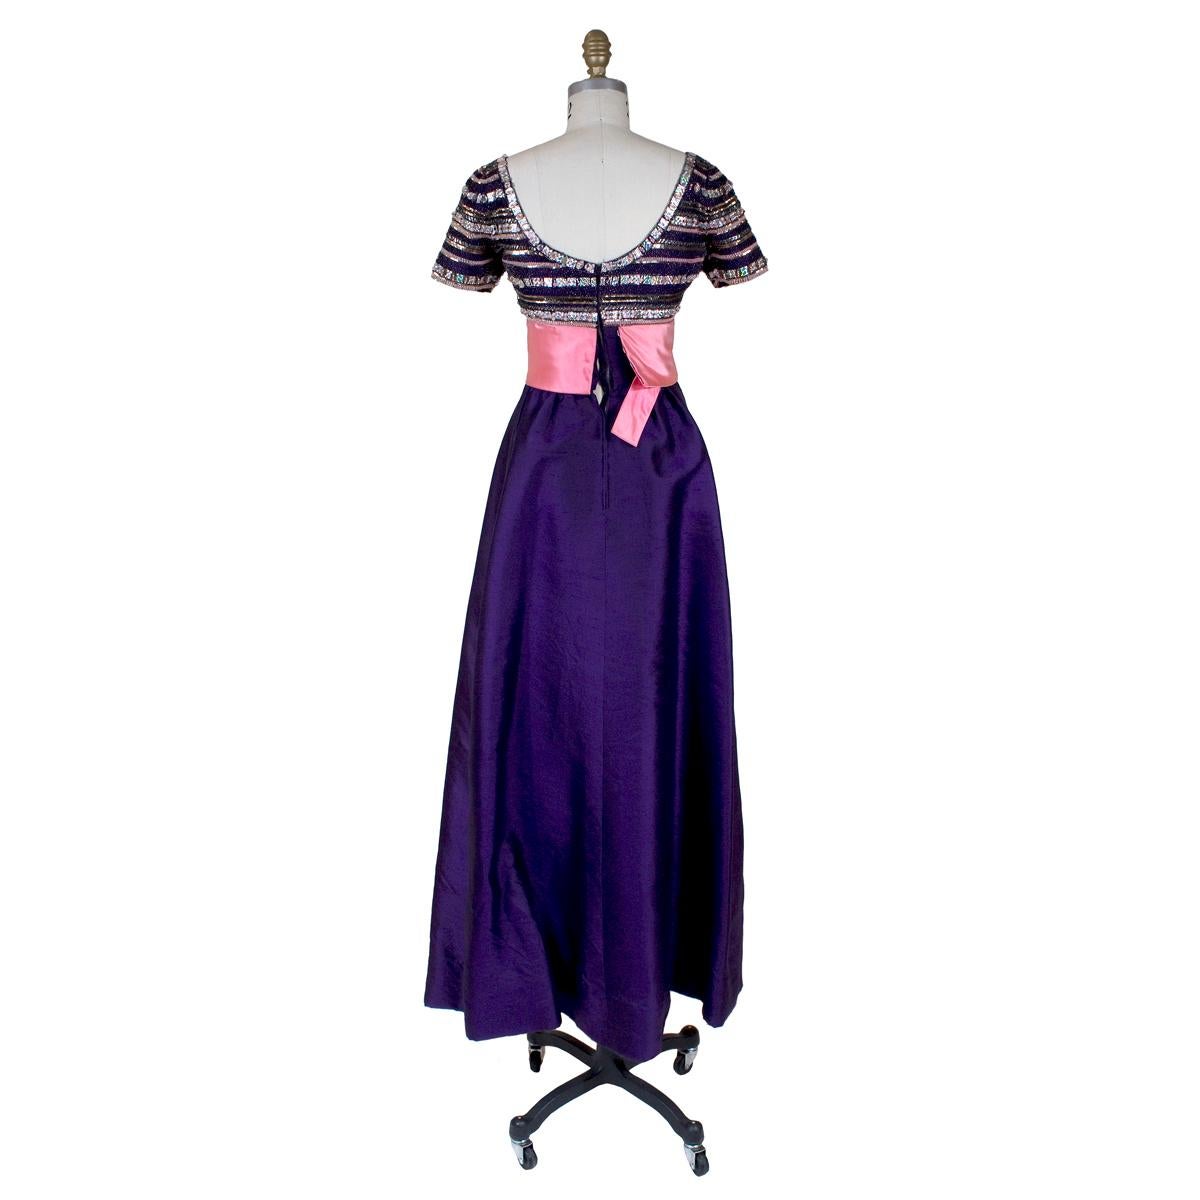 Gown by Pierre Balmain
Empire waist
Striped beaded bodice
Pink satin waistband
Purple silk linen skirt
Condition:  Good vintage condition.  Beading is delicate and missing some in places, and the seams around the zipper are ripping, but the original